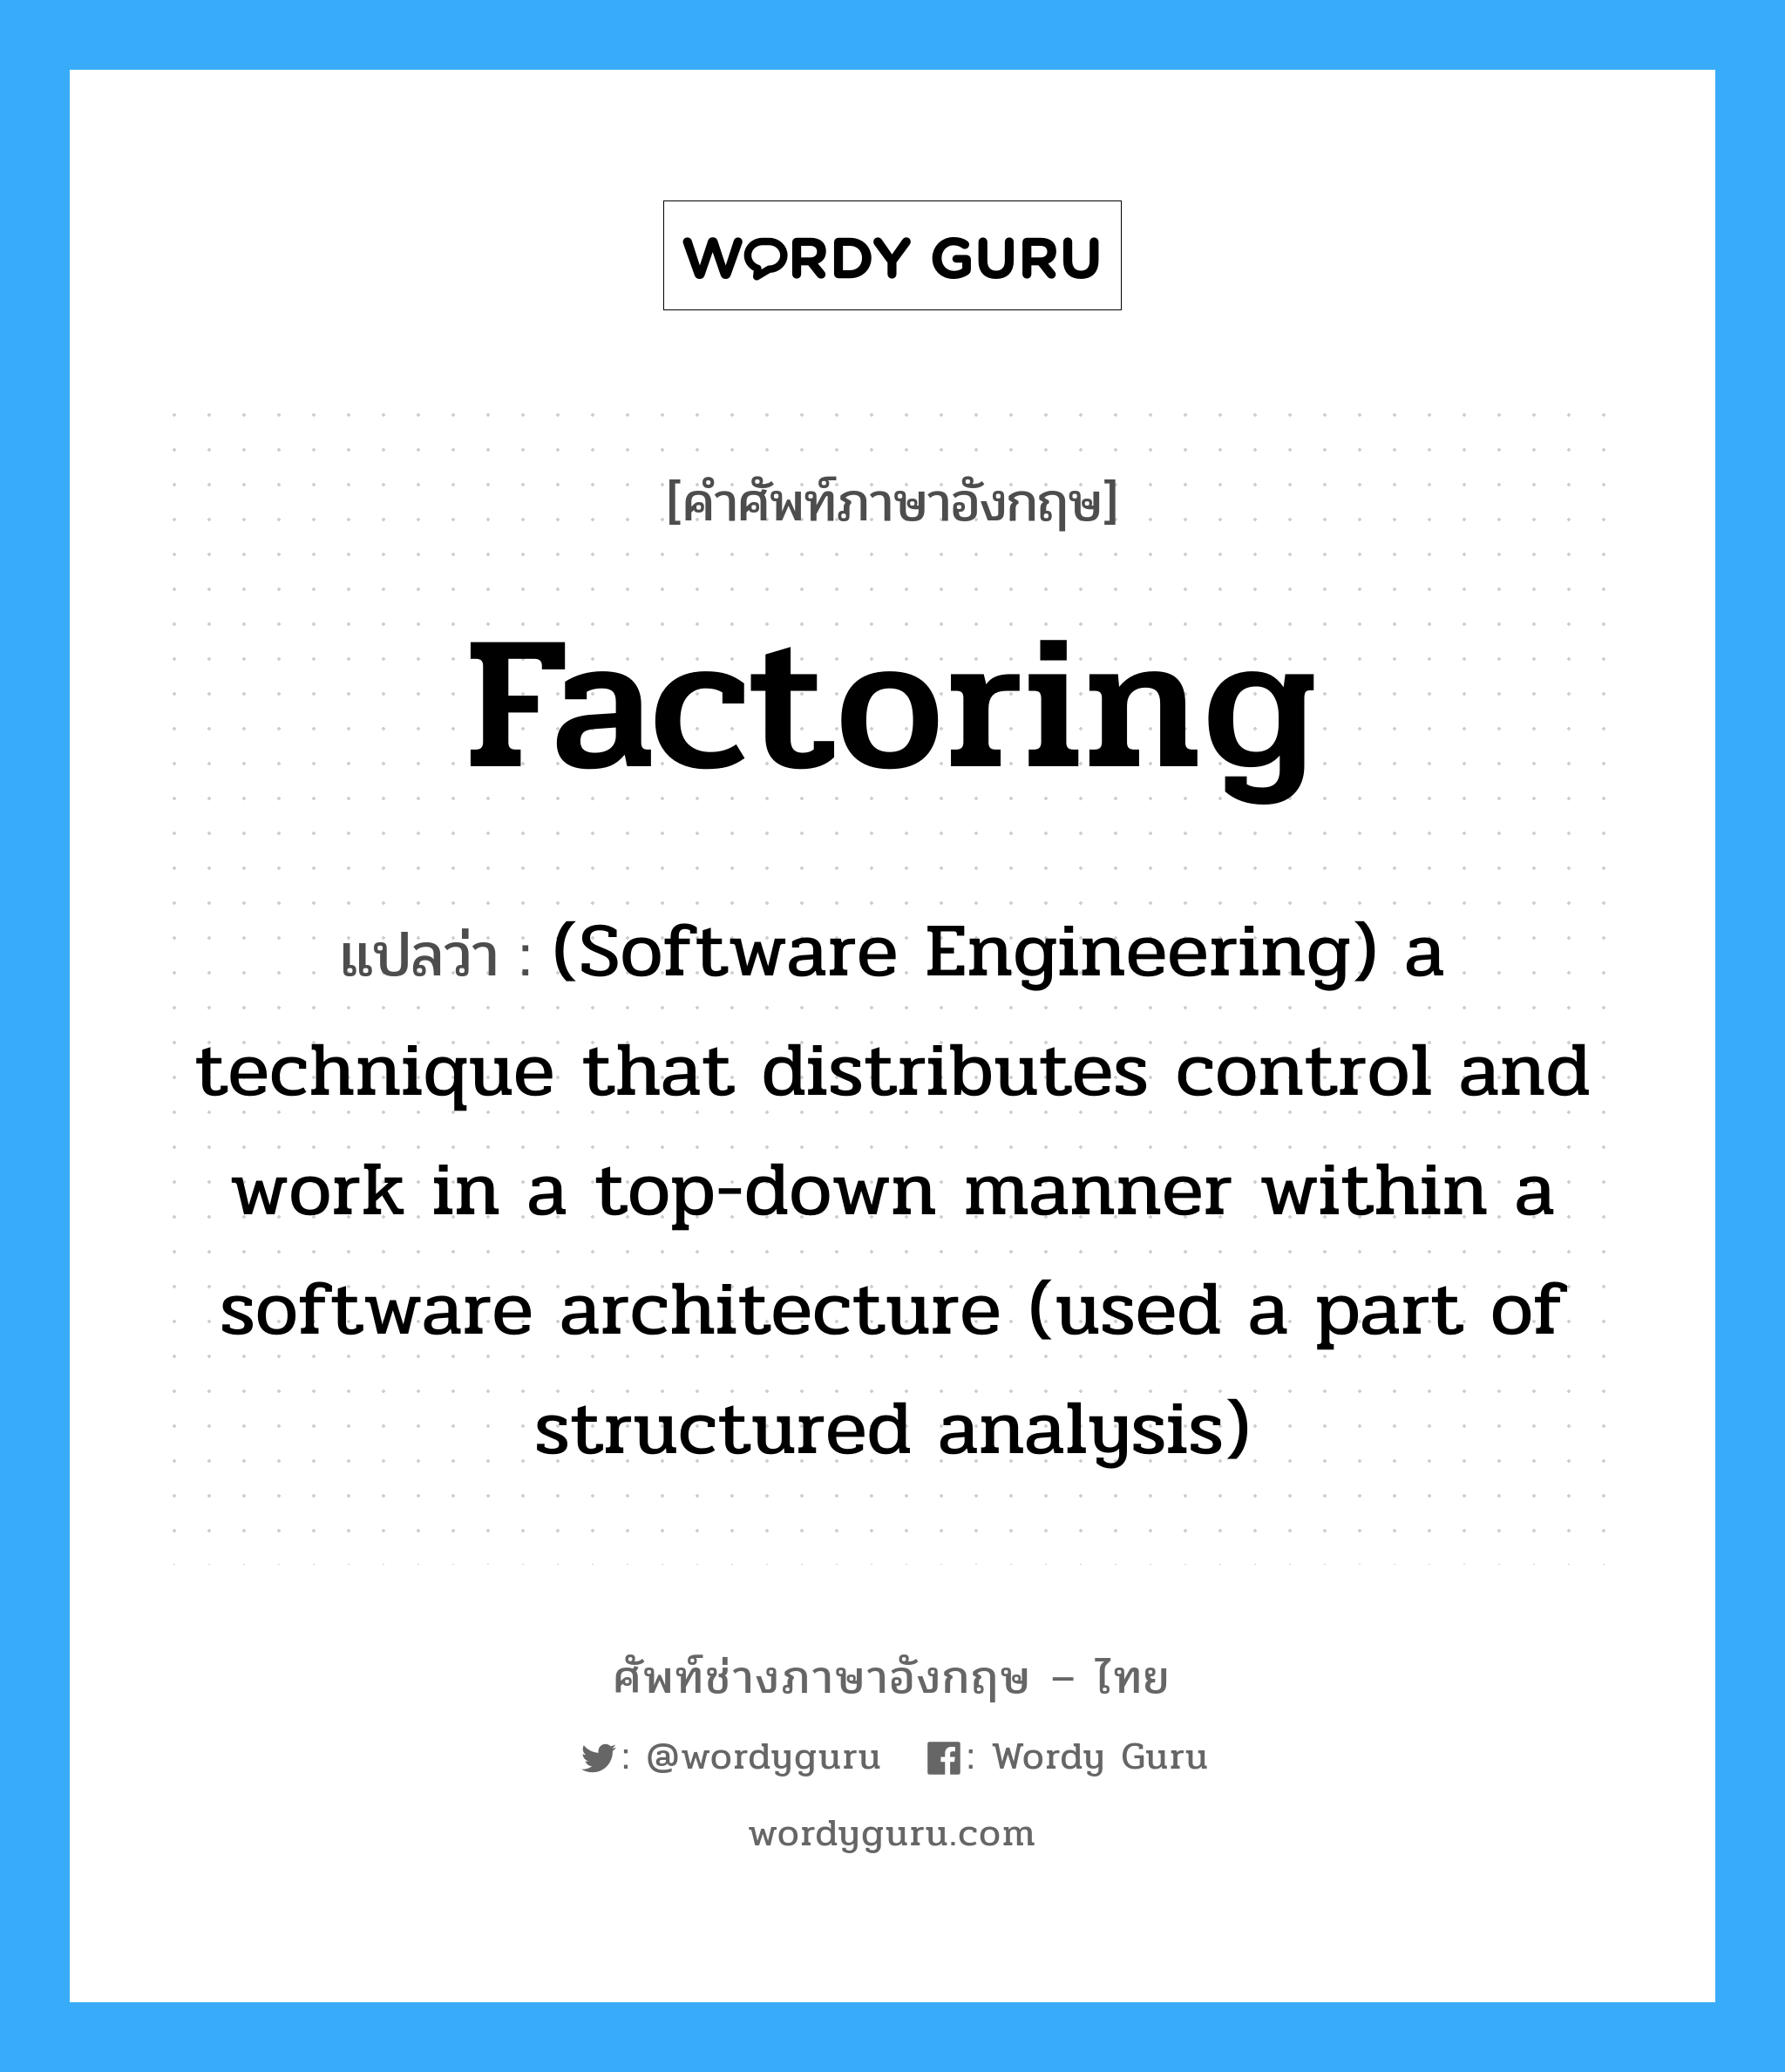 (Software Engineering) a technique that distributes control and work in a top-down manner within a software architecture (used a part of structured analysis) ภาษาอังกฤษ?, คำศัพท์ช่างภาษาอังกฤษ - ไทย (Software Engineering) a technique that distributes control and work in a top-down manner within a software architecture (used a part of structured analysis) คำศัพท์ภาษาอังกฤษ (Software Engineering) a technique that distributes control and work in a top-down manner within a software architecture (used a part of structured analysis) แปลว่า Factoring